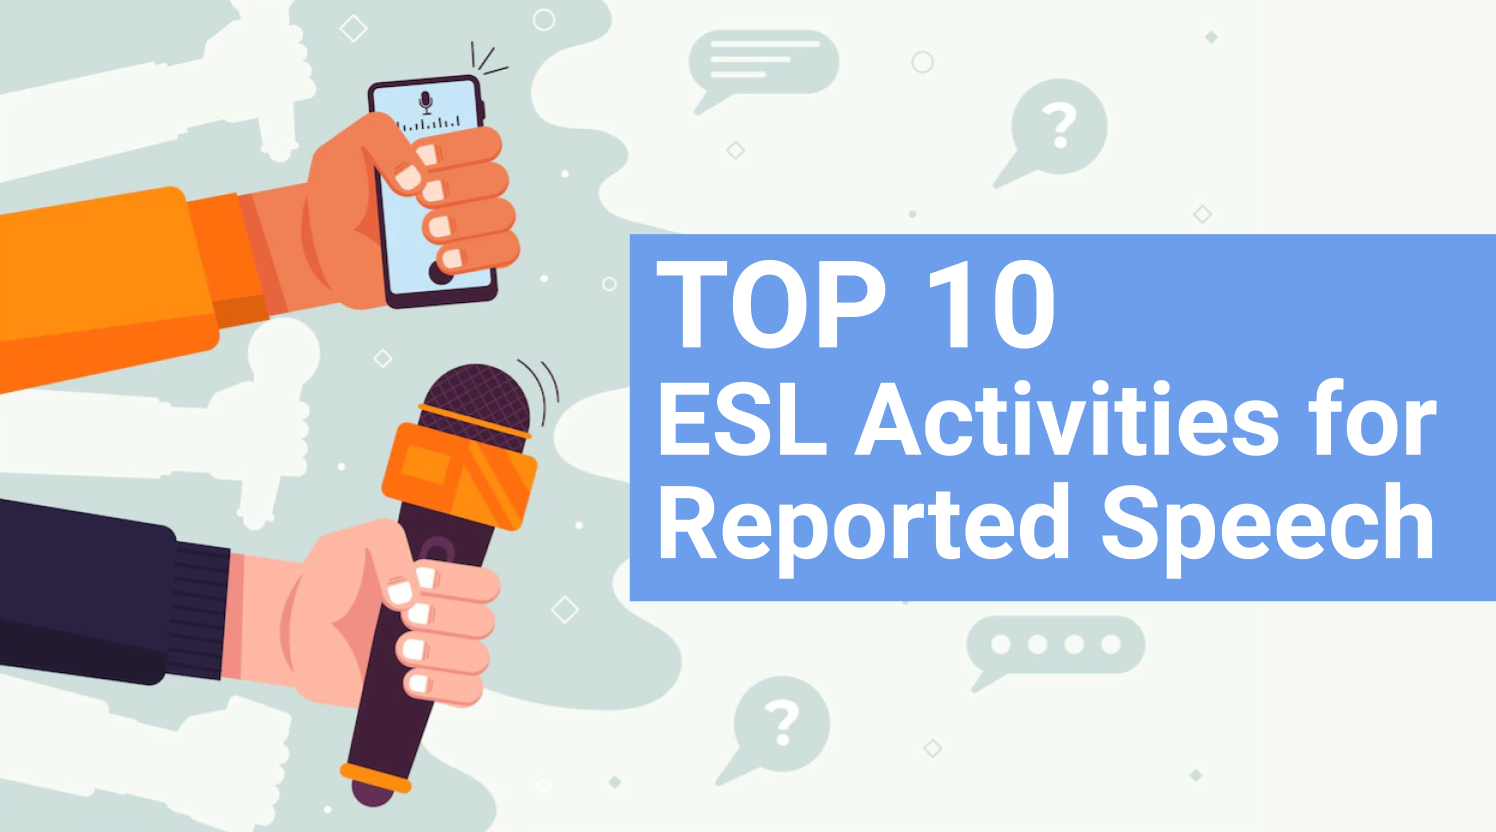 He Said What? Top 10 ESL Activities for Reported Speech